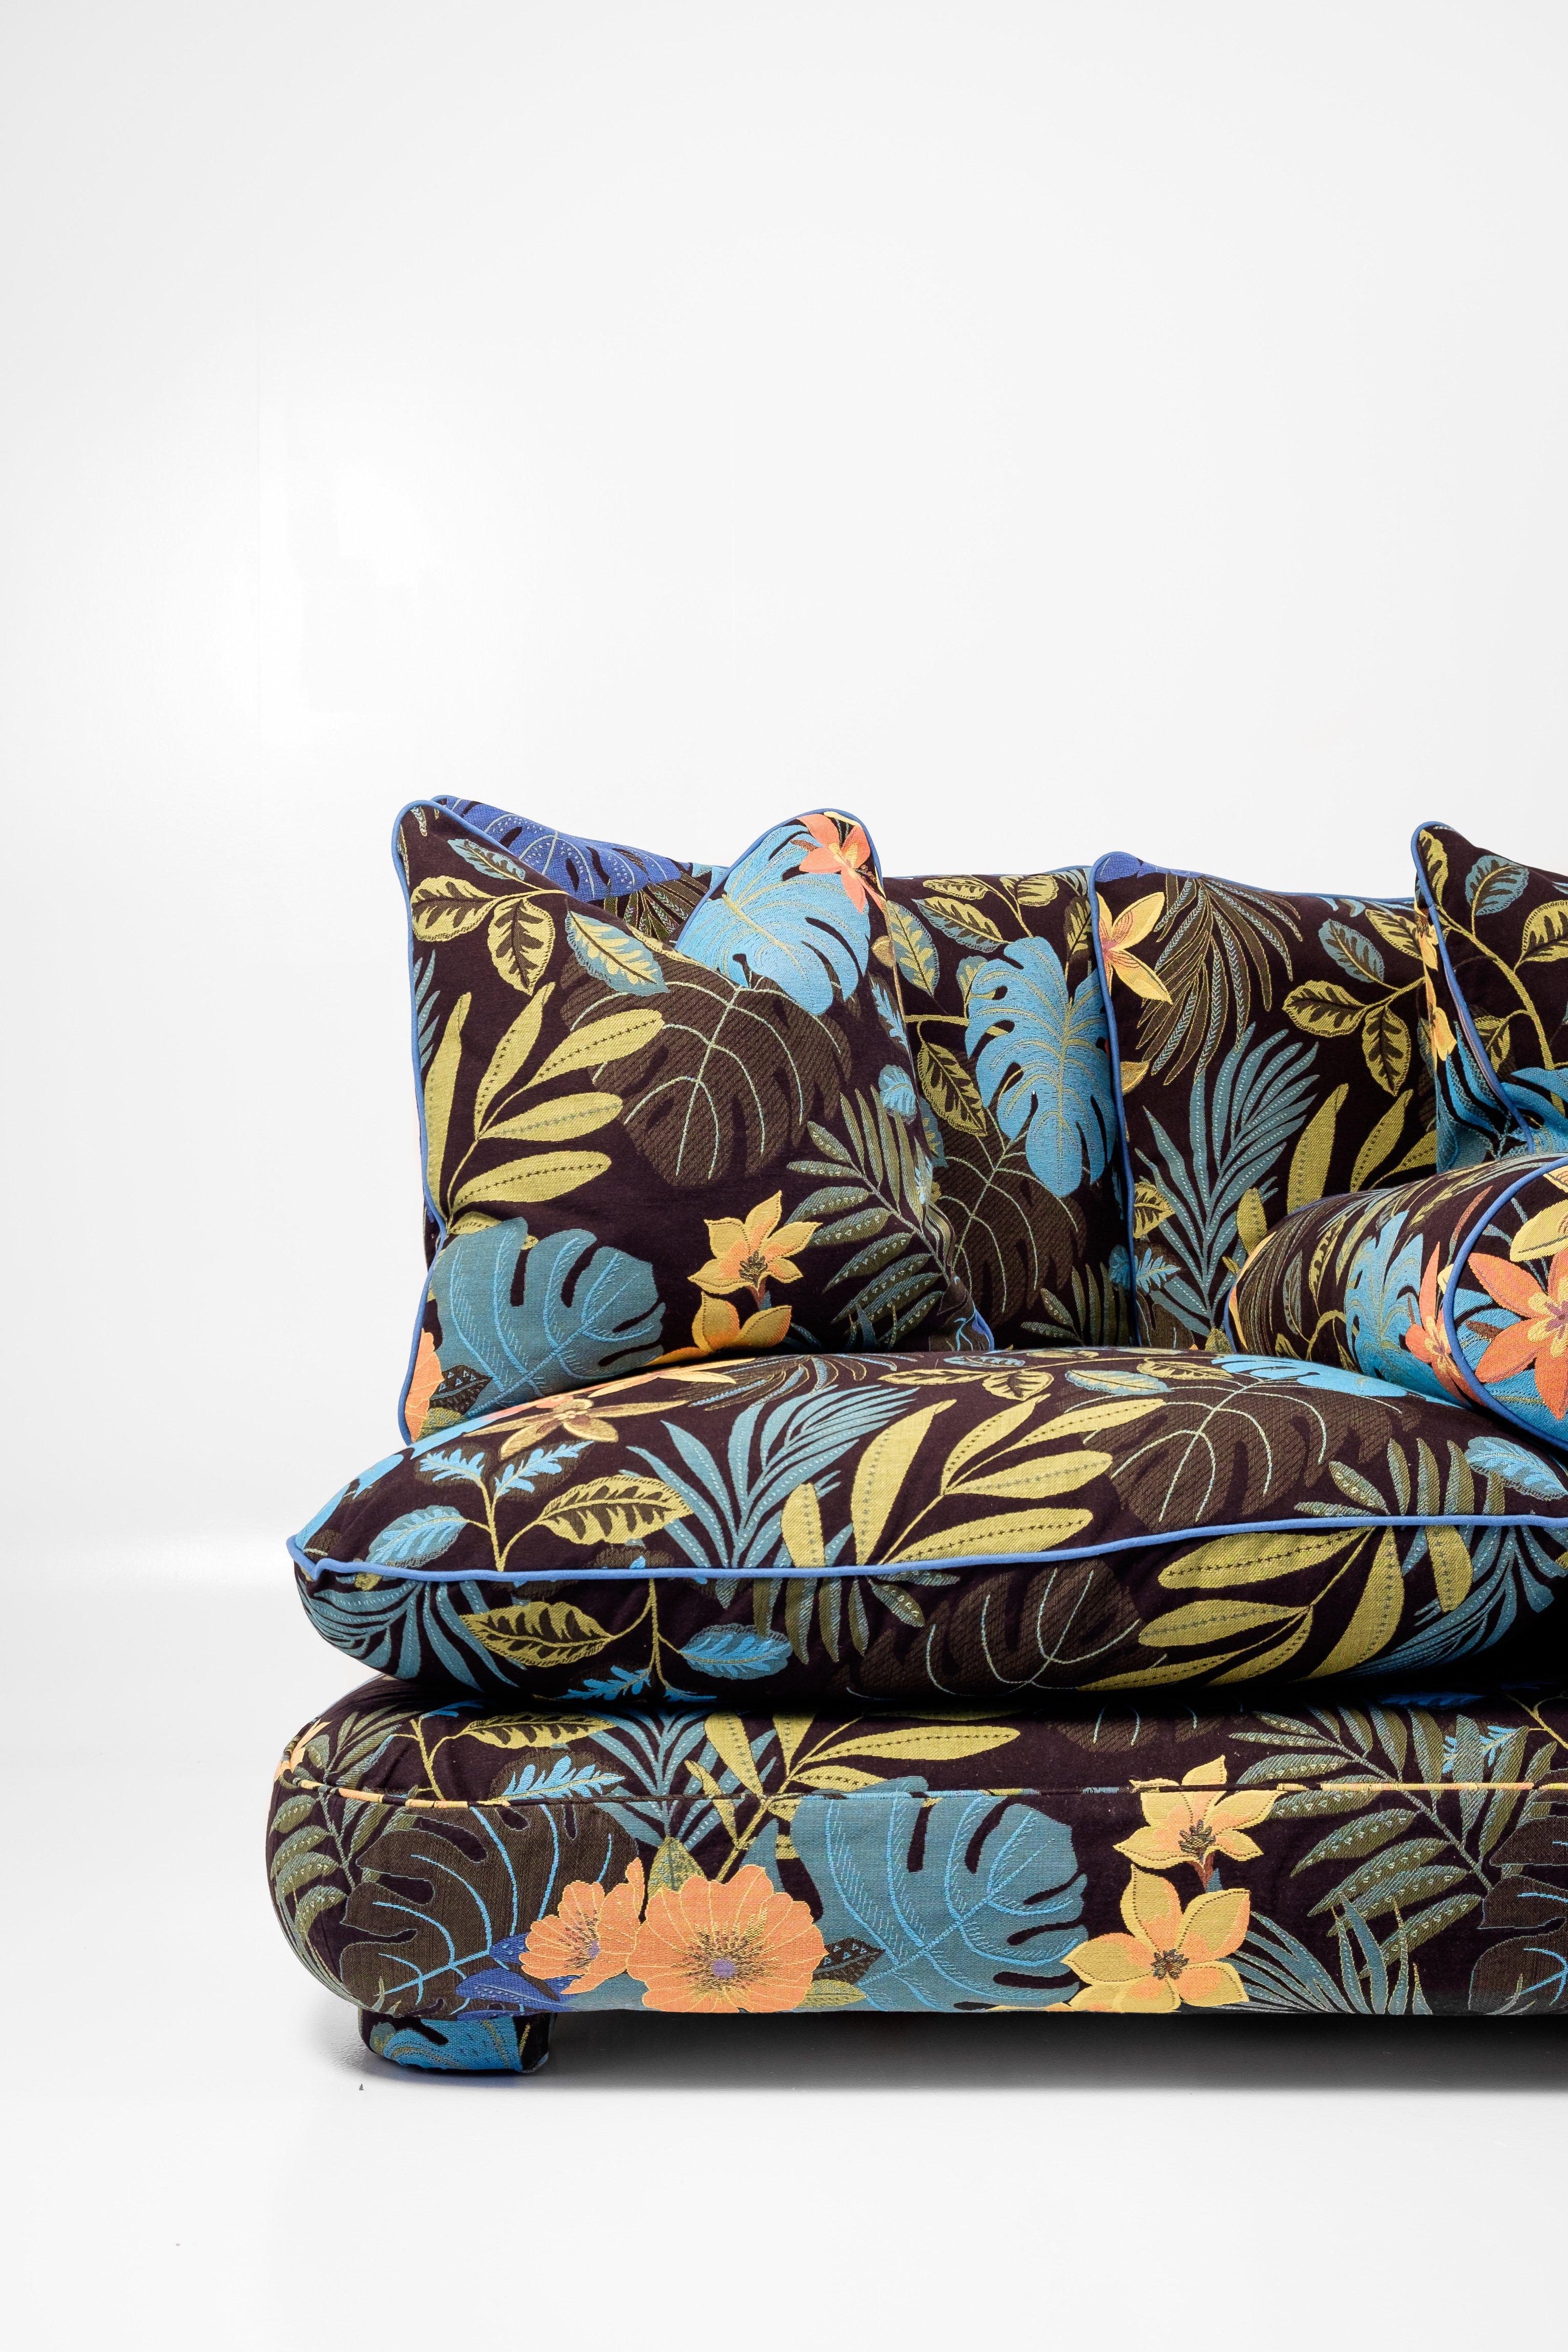 Belgian JPDemeyer Home Collection Grand Sofa Cha-Cha in Jungle by Night Fabric For Sale